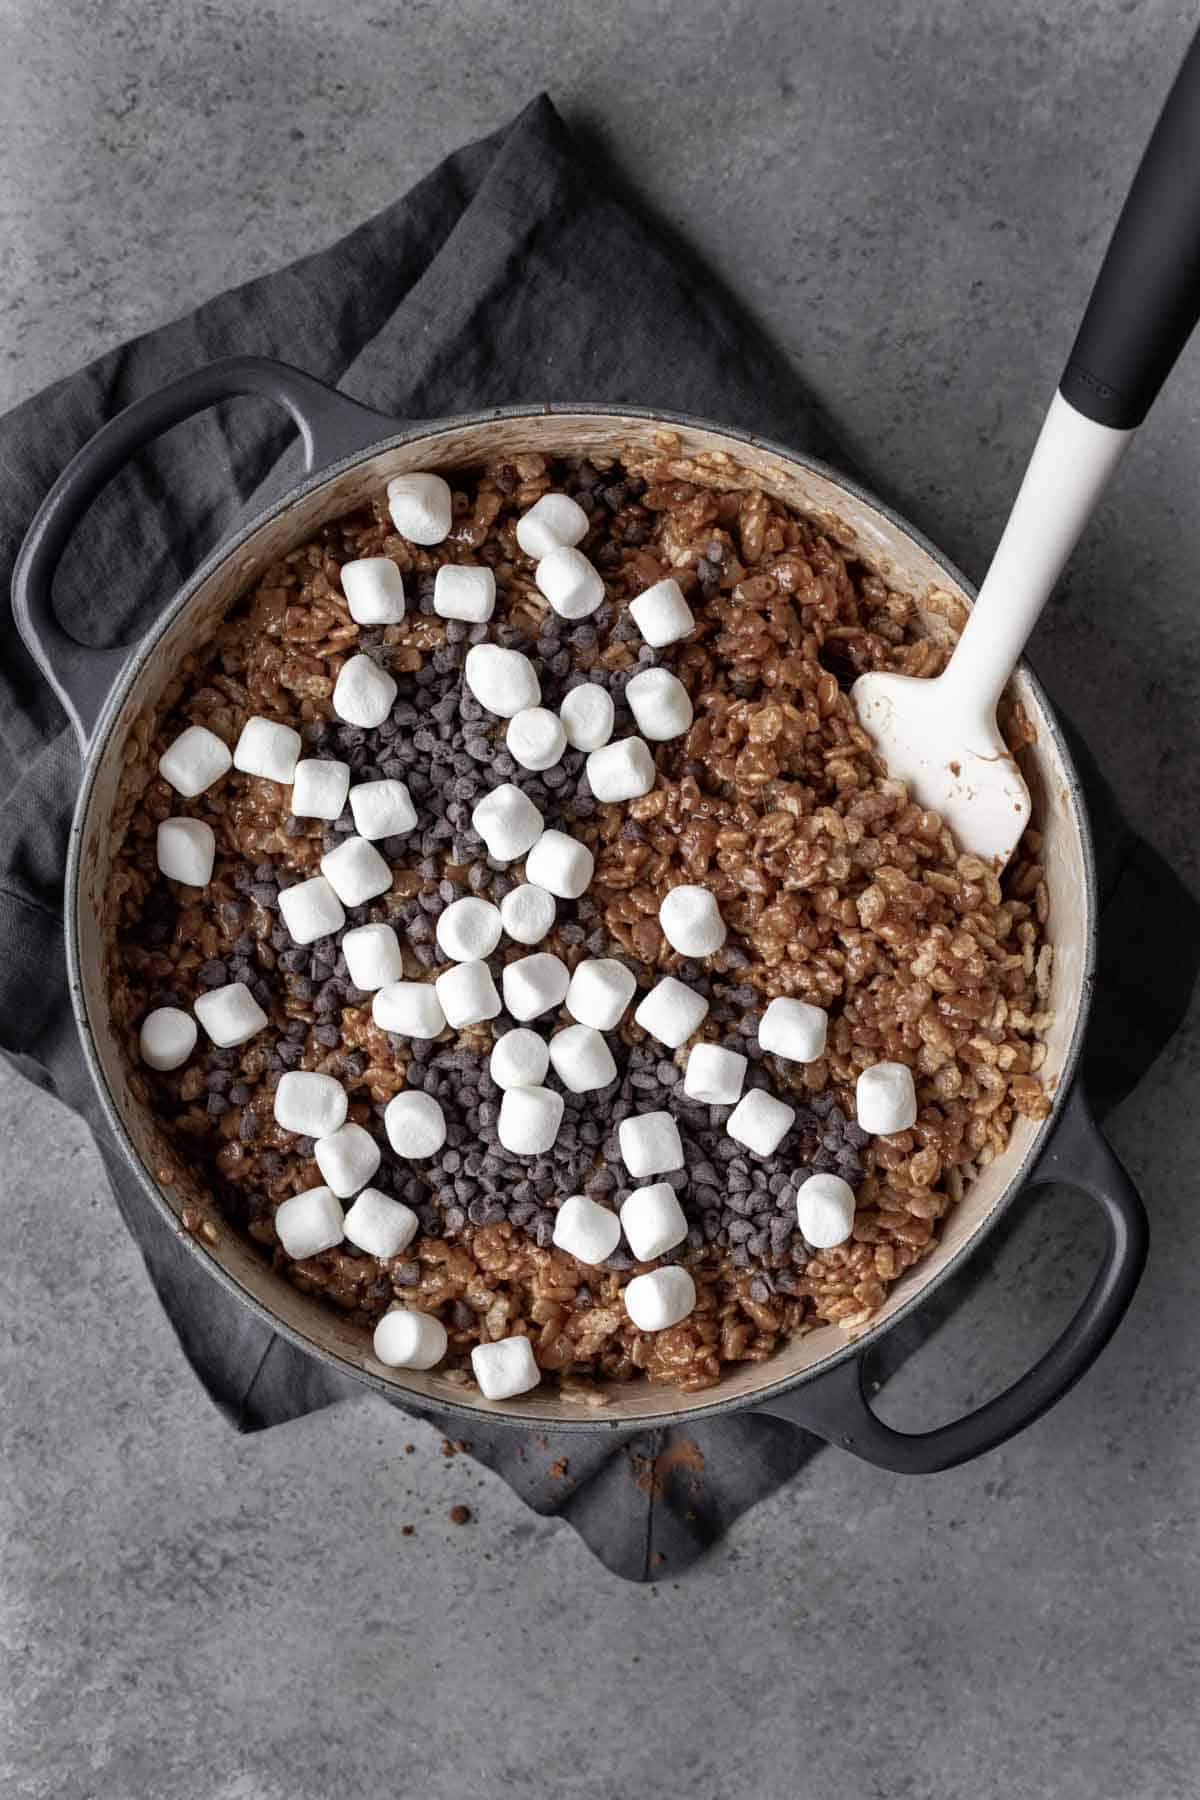 Hot chocolate rice krispies with marshmallows and mini chocolate chips stirred in.